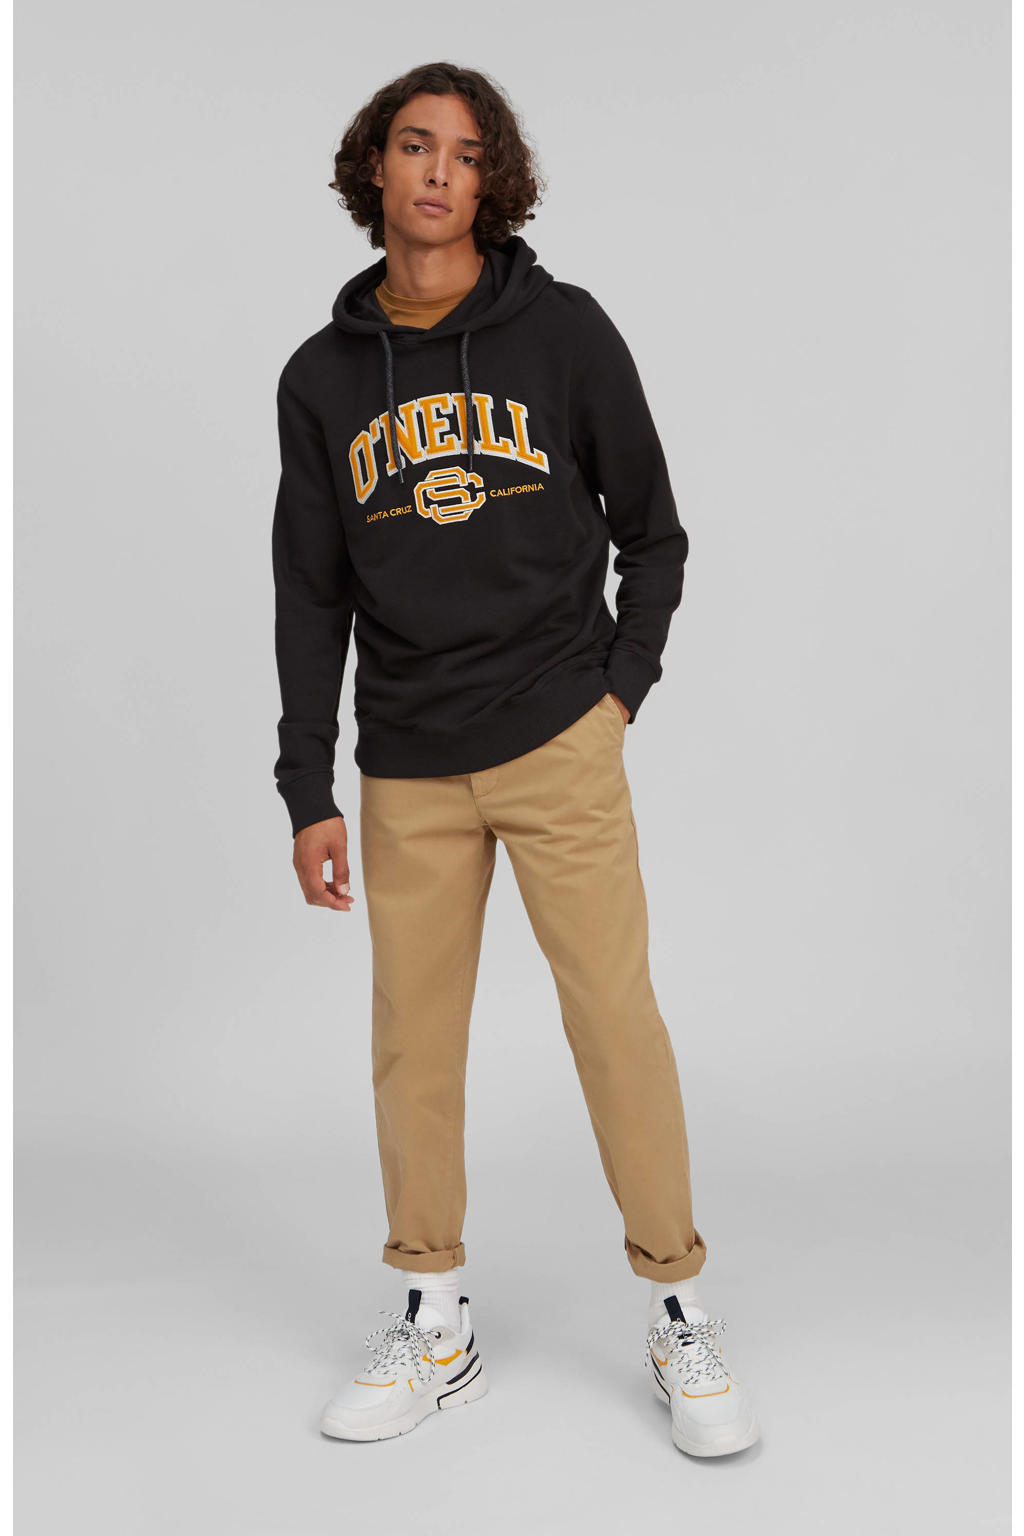 O'Neill hoodie Surf State met logo black out - a